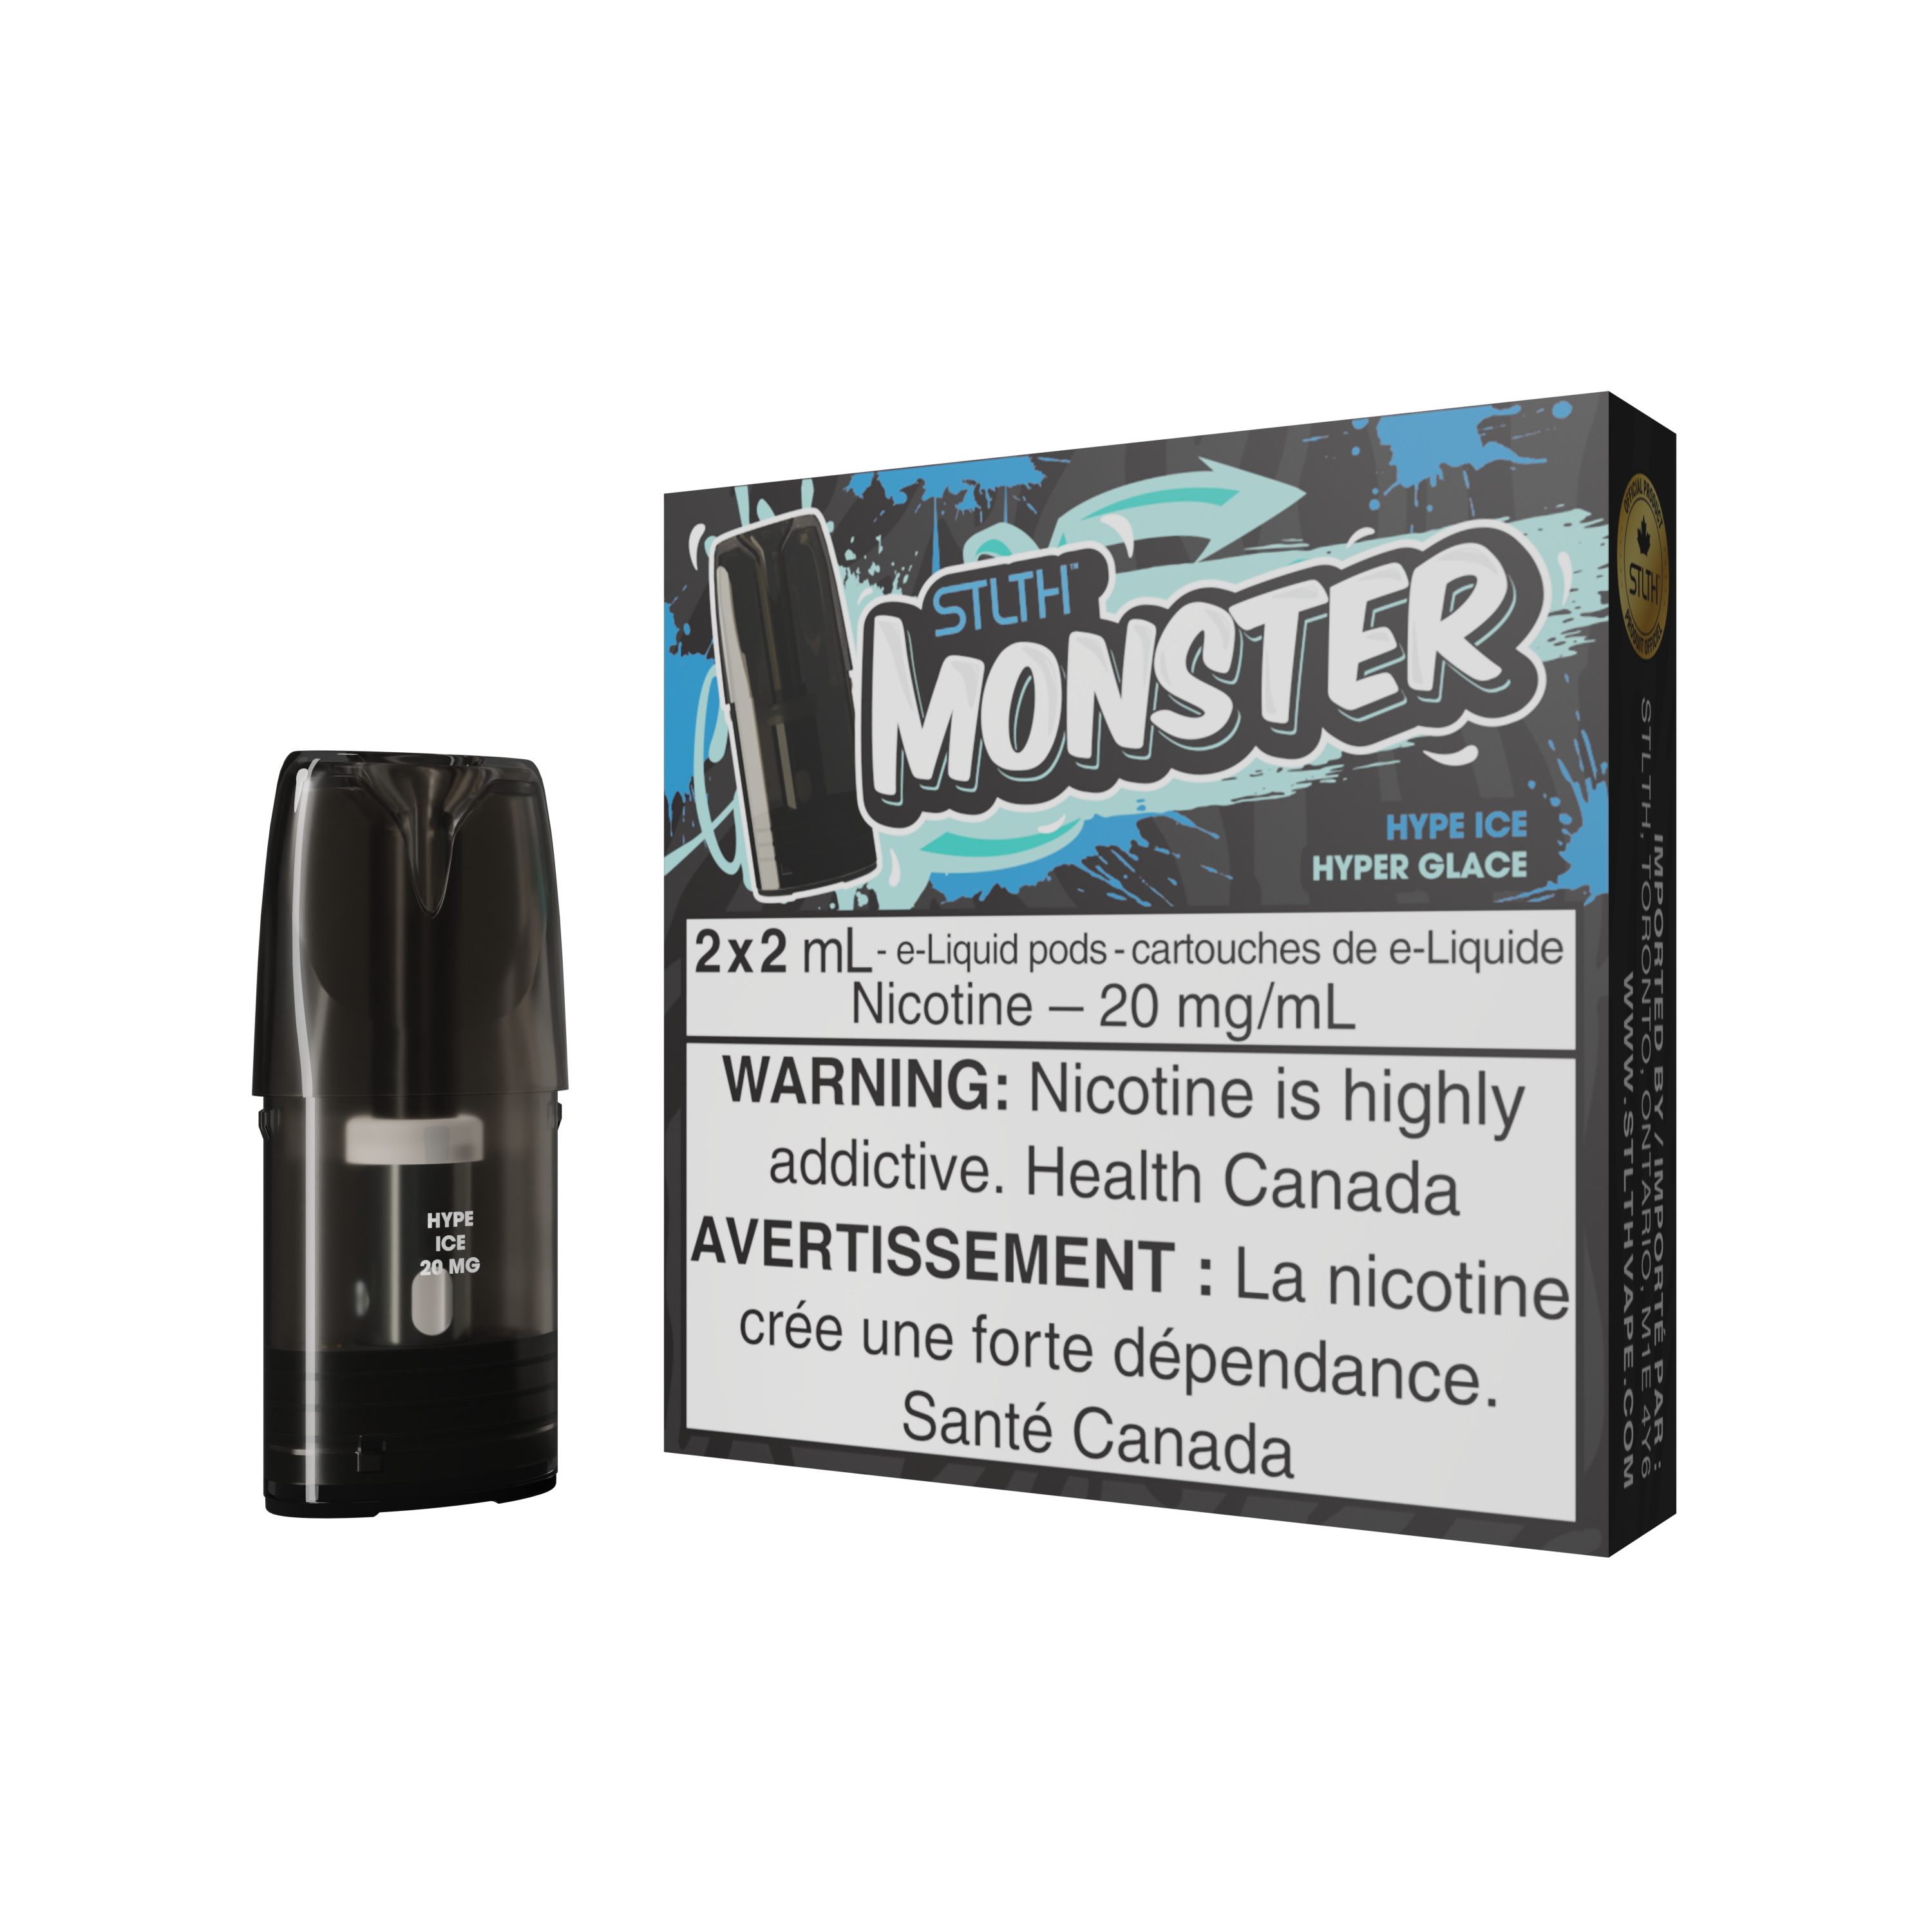 STLTH MONSTER PODS- HYPE ICE